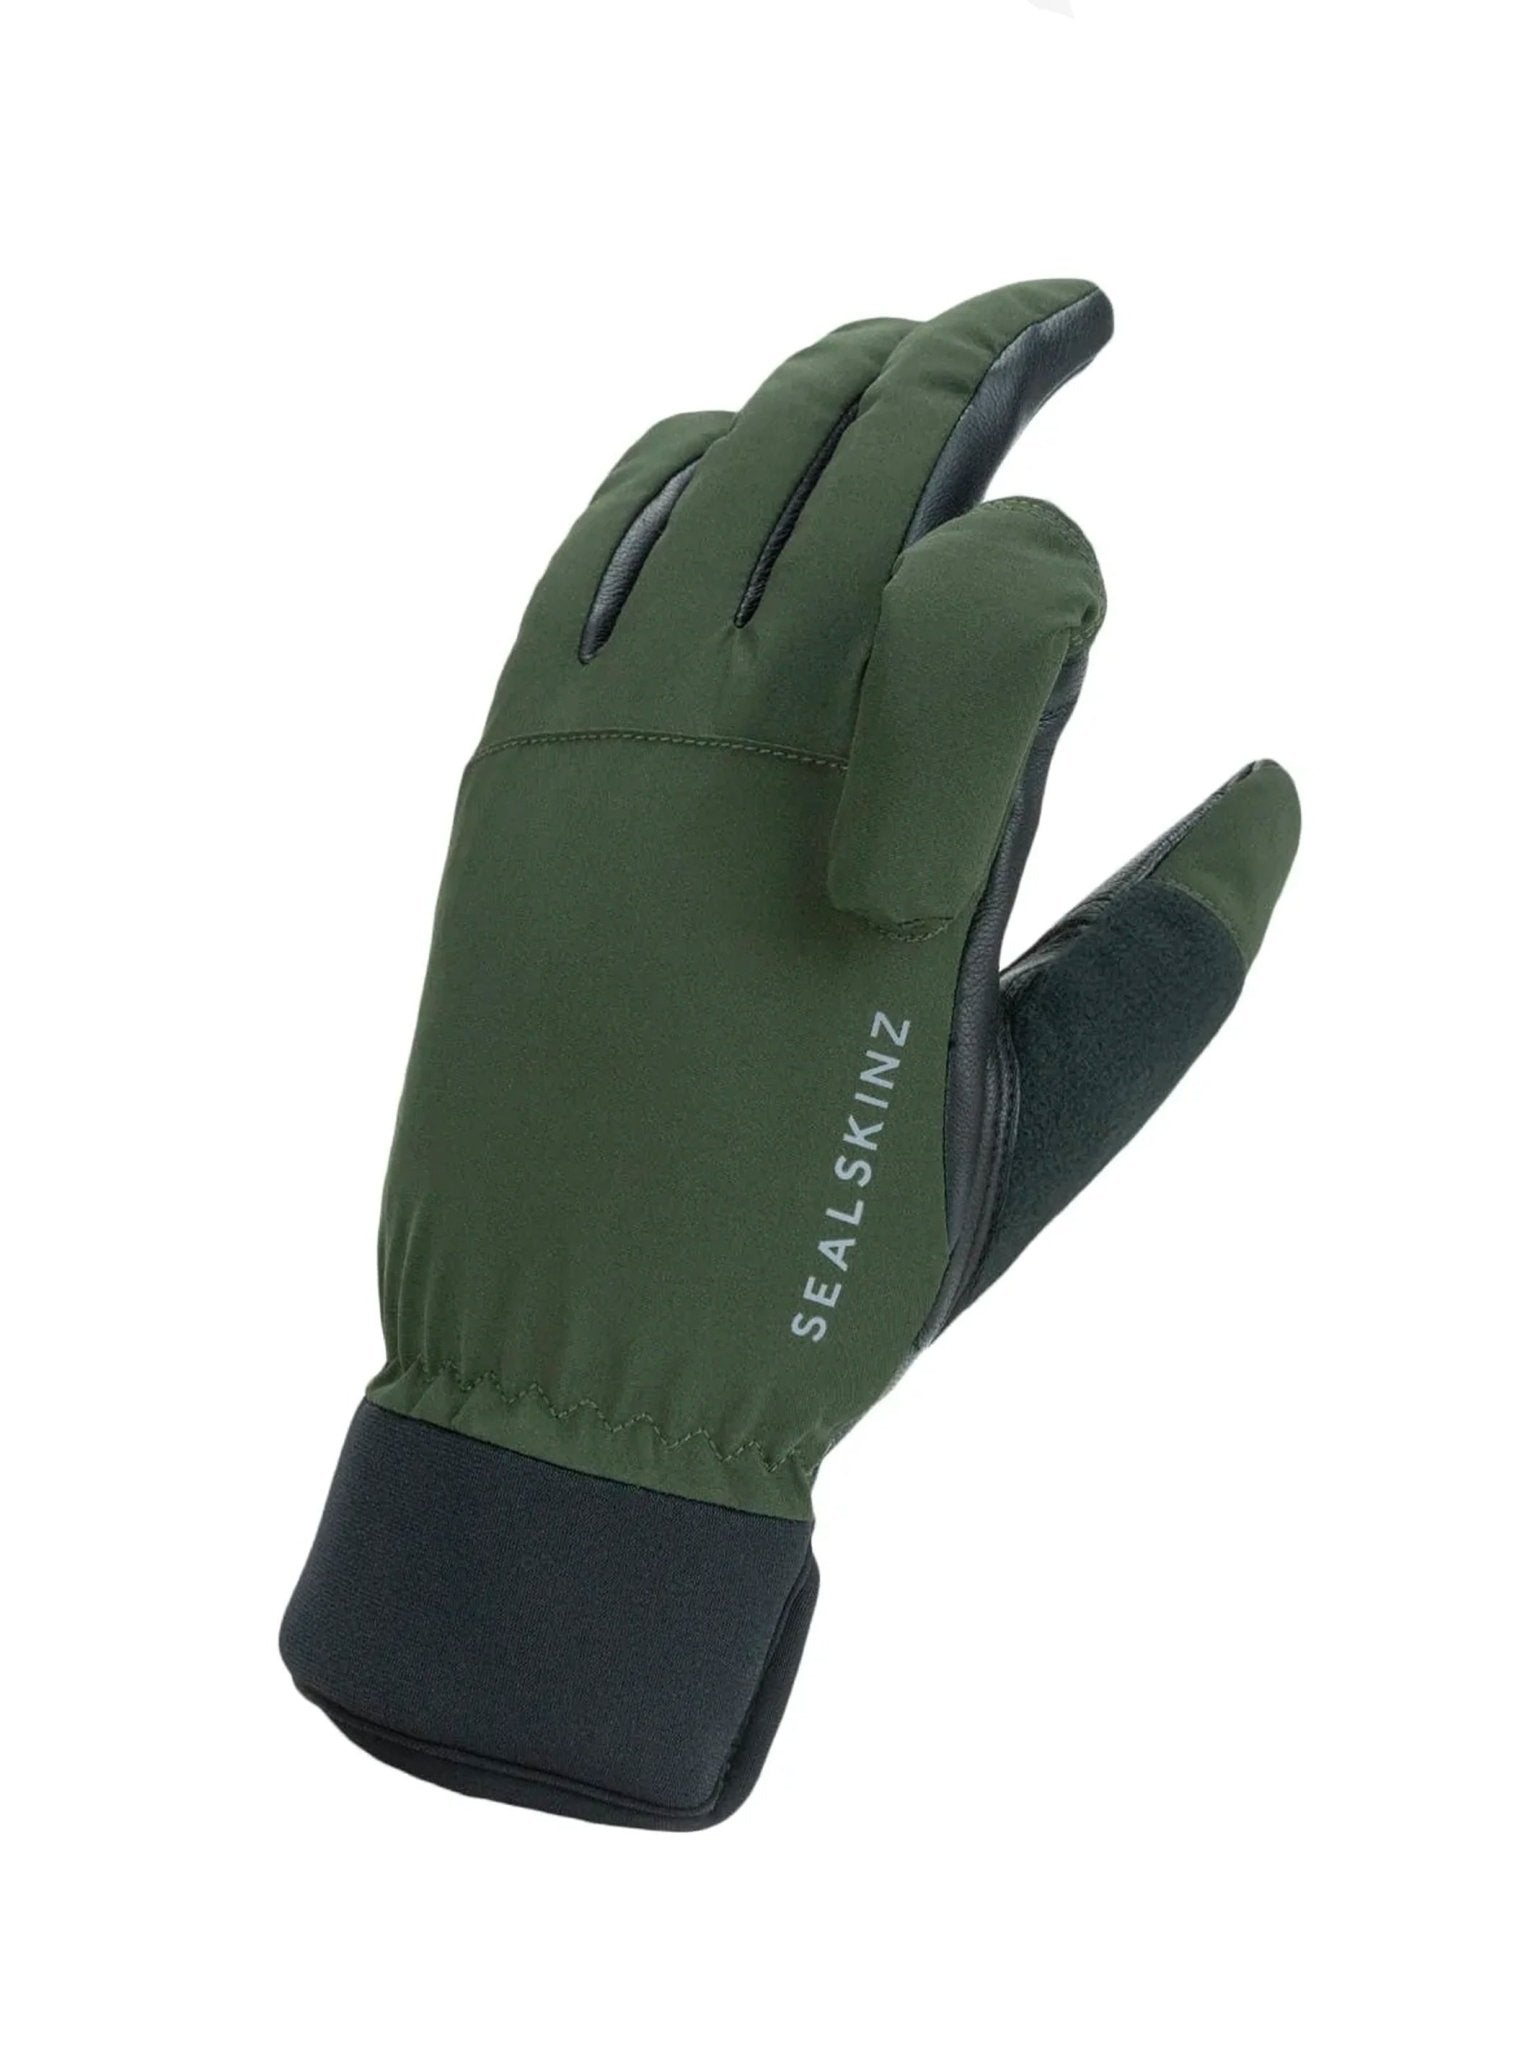 4elementsclothingSealSkinzSealSkinz - Waterproof Breathable Shooting Glove - All Weather - BroomeGloves12100085001310